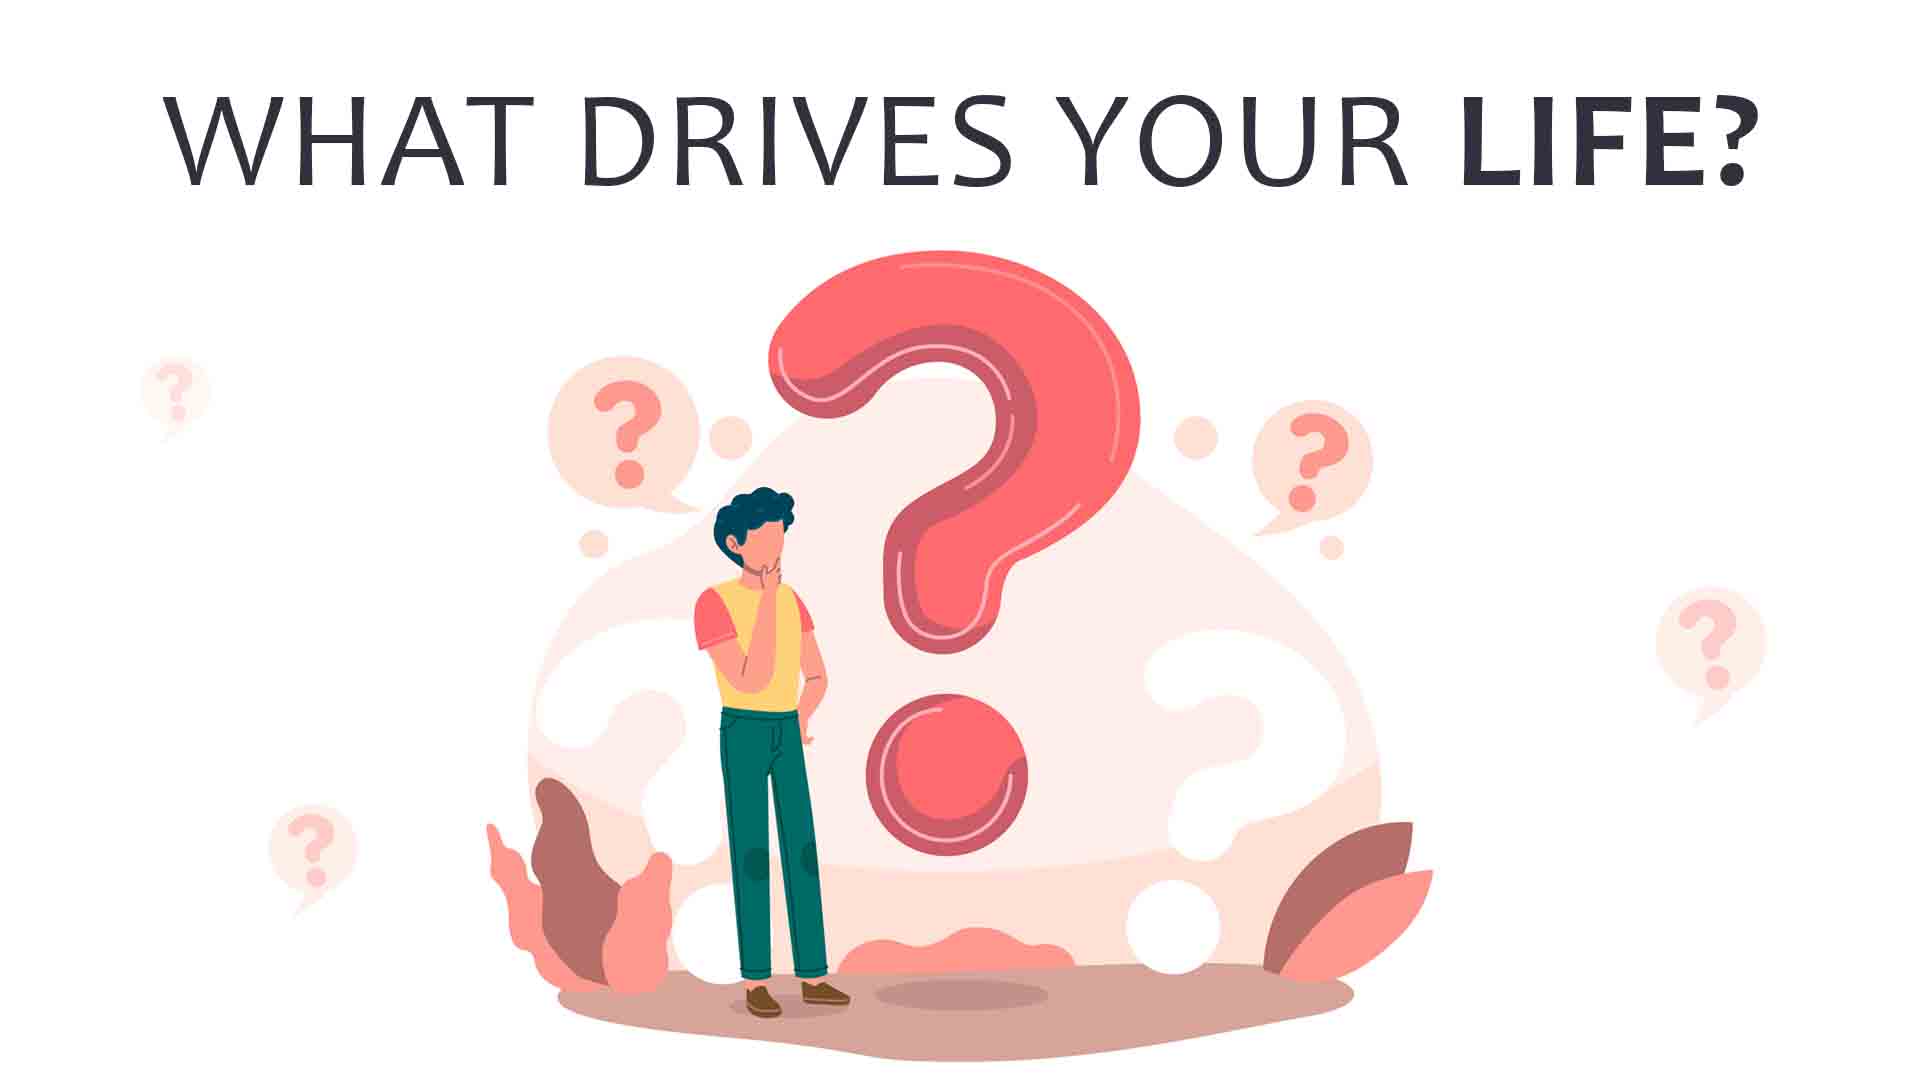 drives your life?